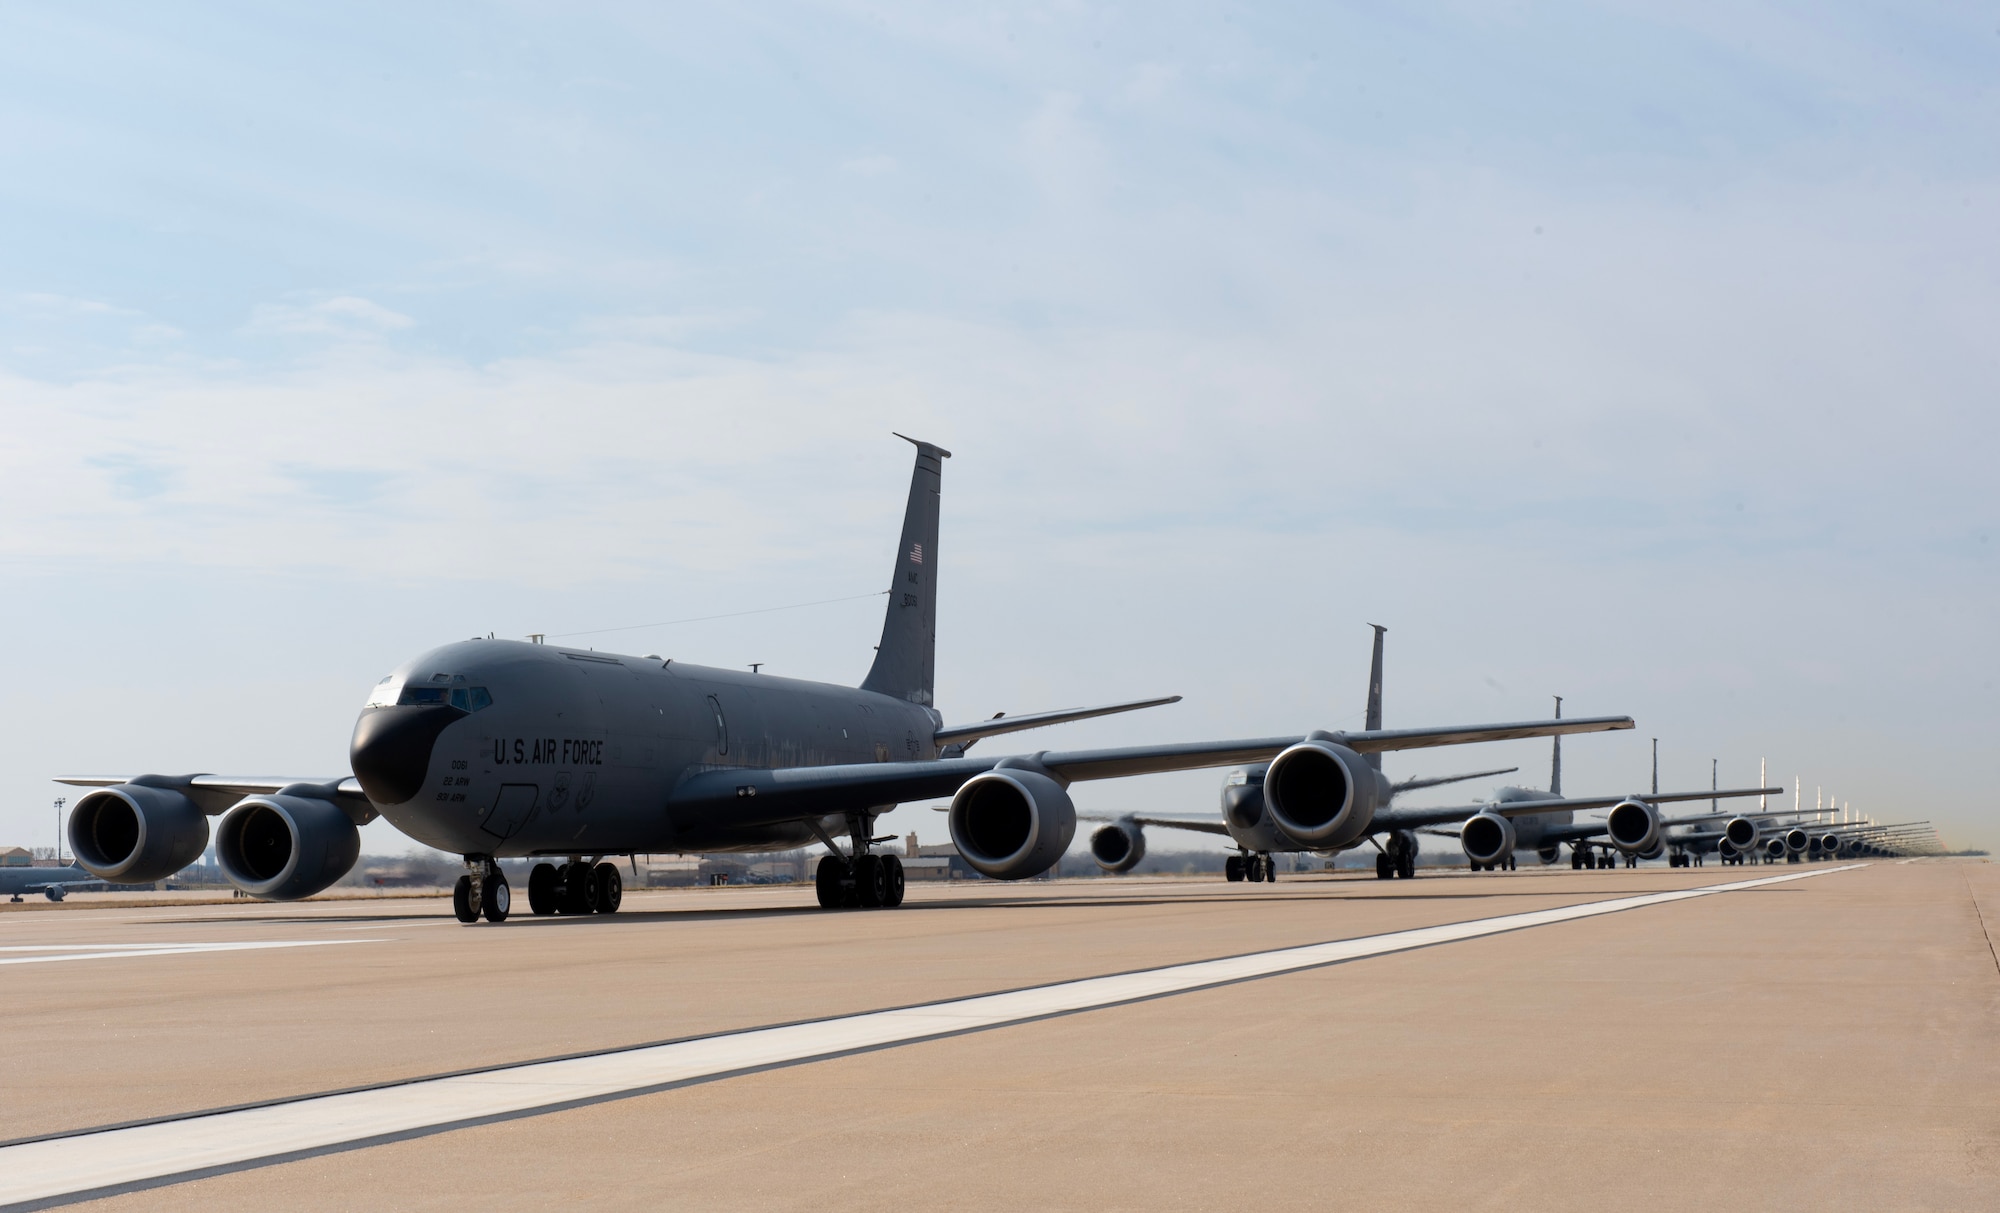 Sixteen KC-46 Pegasus and five KC-135 Stratotankers perform an elephant walk during Exercise Lethal Pride at McConnell Air Force Base, Kansas, March 27, 2023. After the elephant walk the aircraft participated in an aircraft flush where they all took off in rapid succession. (U.S. Air Force photo by Staff Sgt. Tryphena Mayhugh)